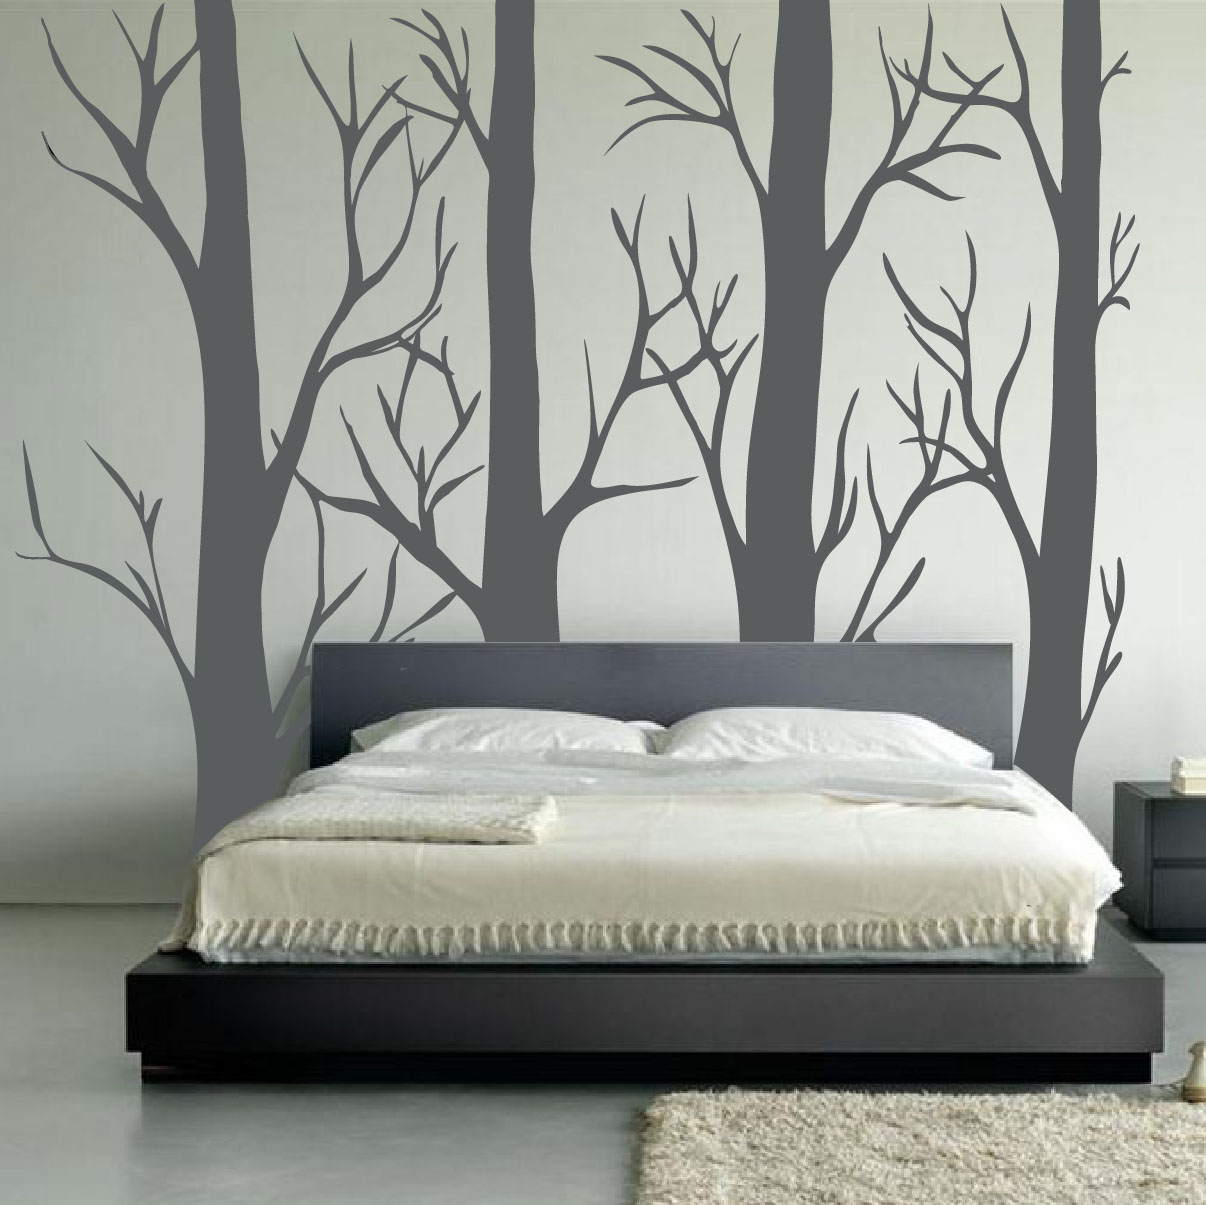 Large Wall Vinyl Tree Forest Decal Birch Aspen Removable 1310 9479